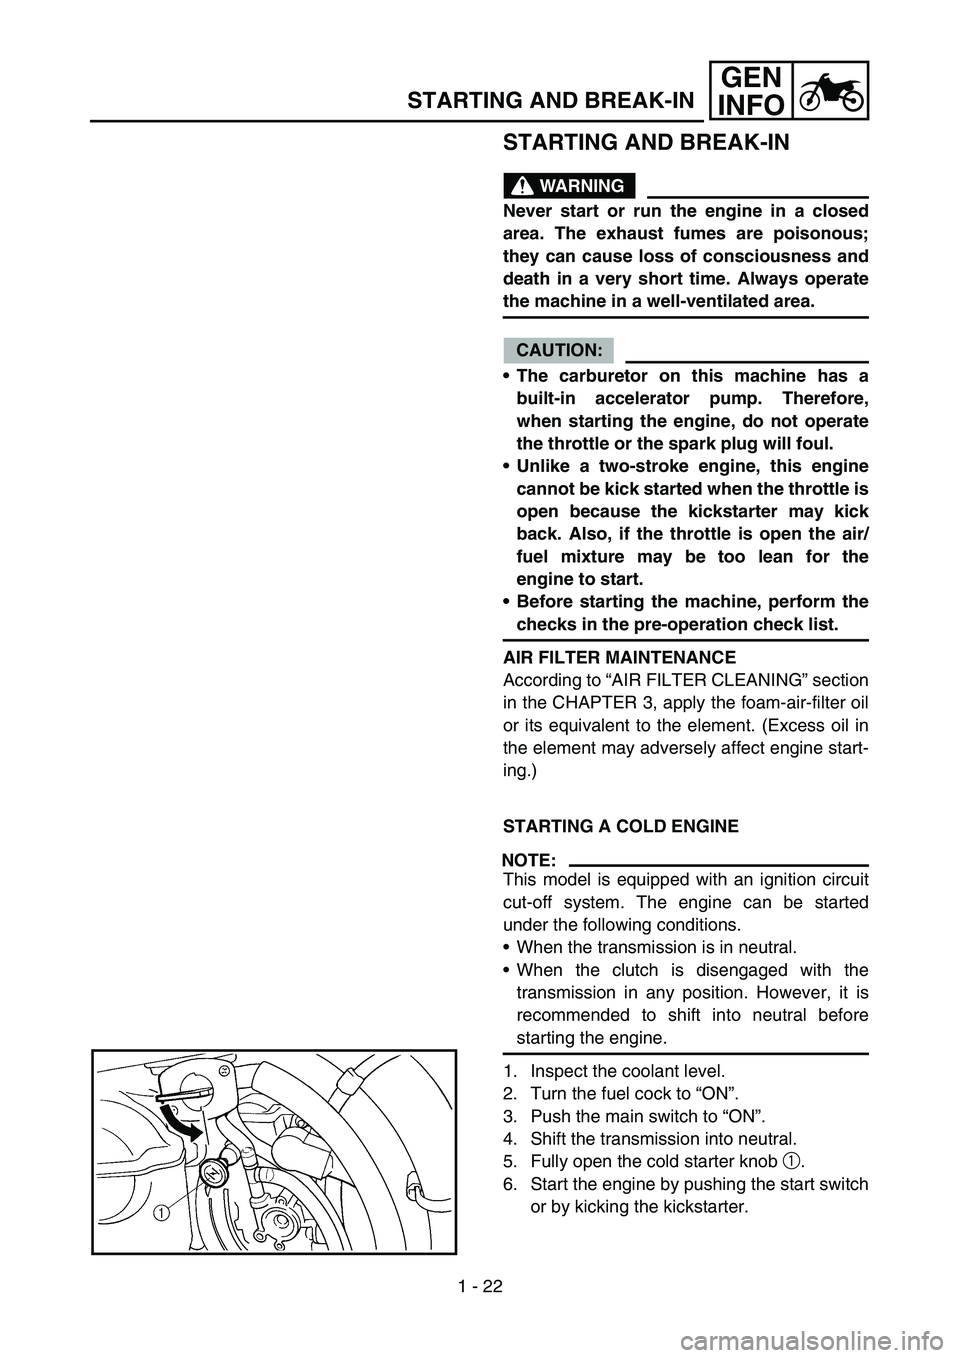 YAMAHA WR 450F 2006  Owners Manual 1 - 22
GEN
INFO
STARTING AND BREAK-IN
STARTING AND BREAK-IN
WARNING
Never start or run the engine in a closed
area. The exhaust fumes are poisonous;
they can cause loss of consciousness and
death in a